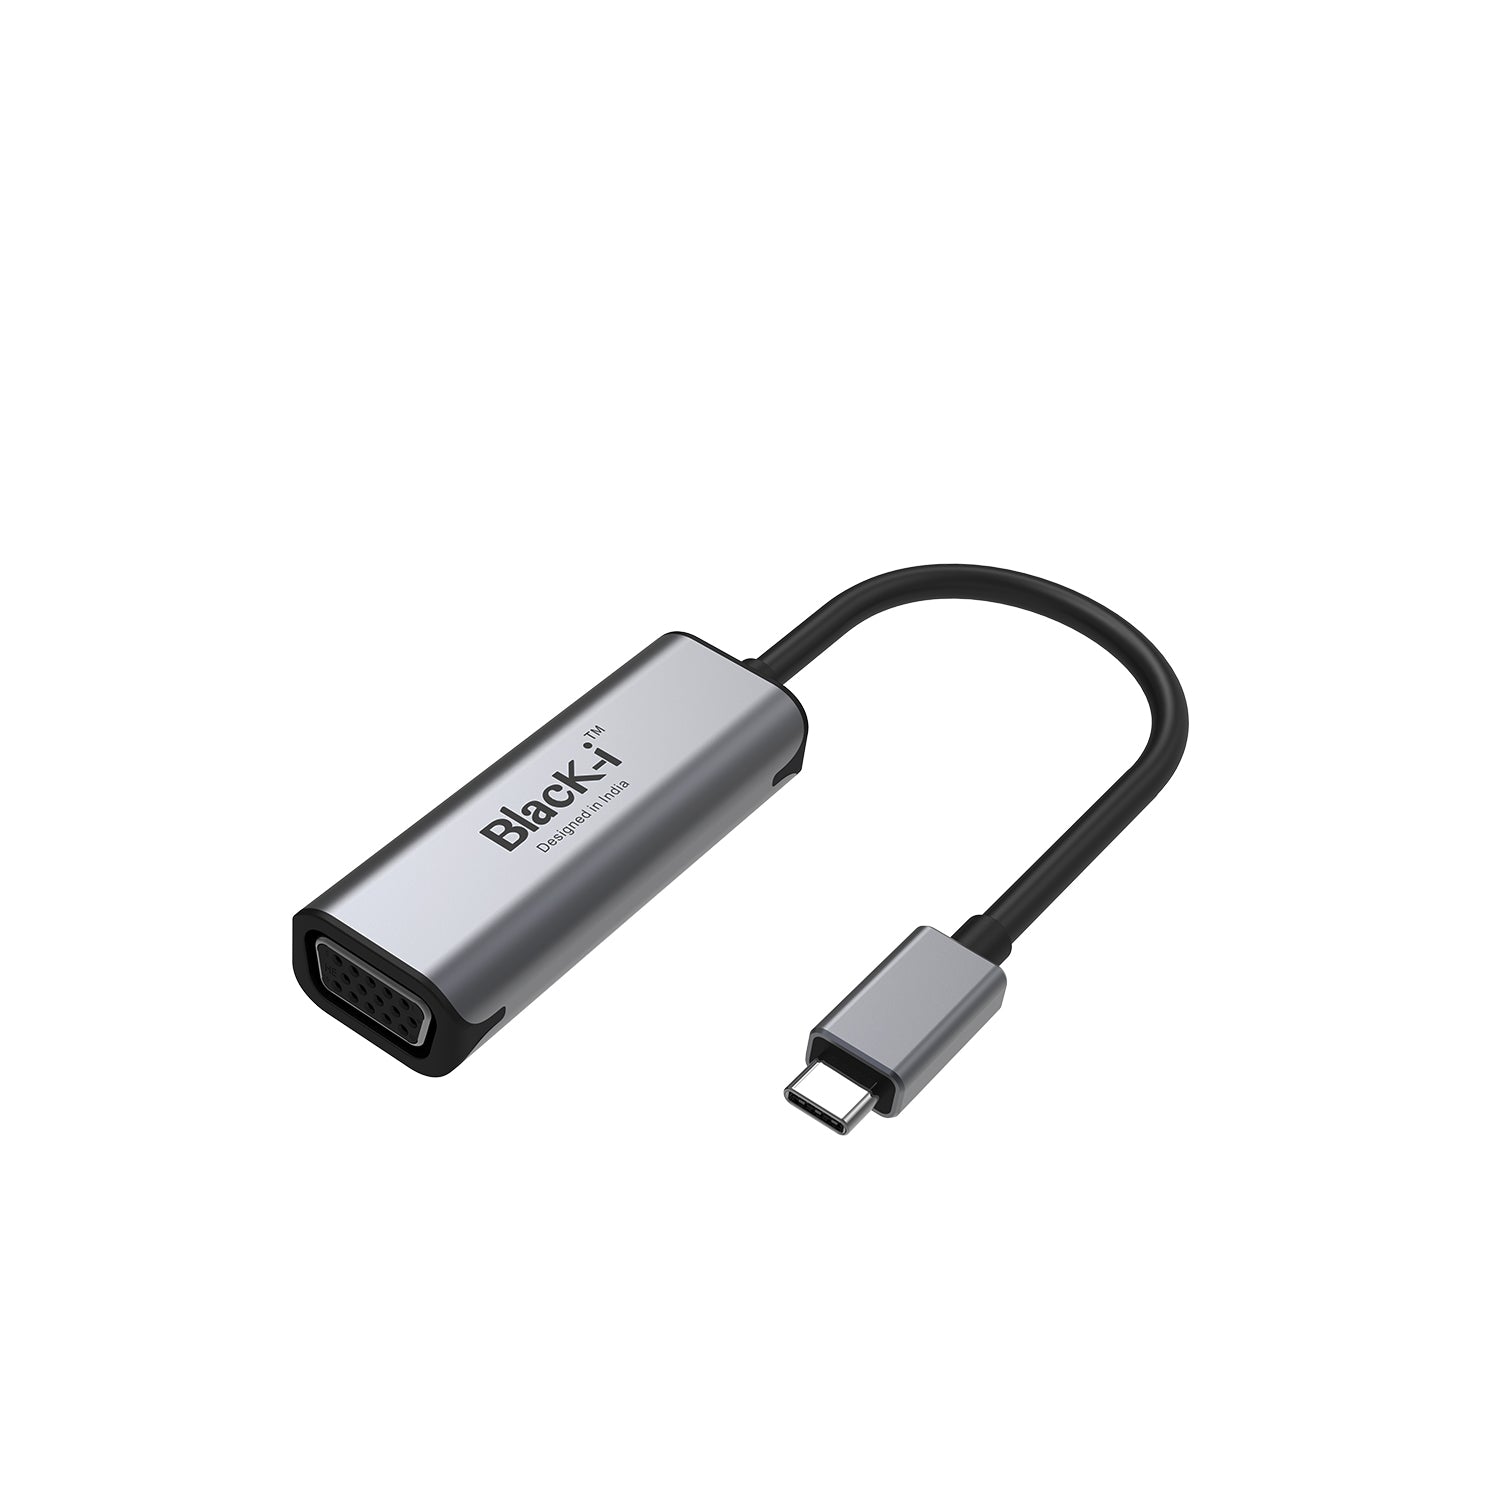 Black-i USB-C to VGA Converter – Effortless Connectivity for Enhanced Visual Display in a Compact Design